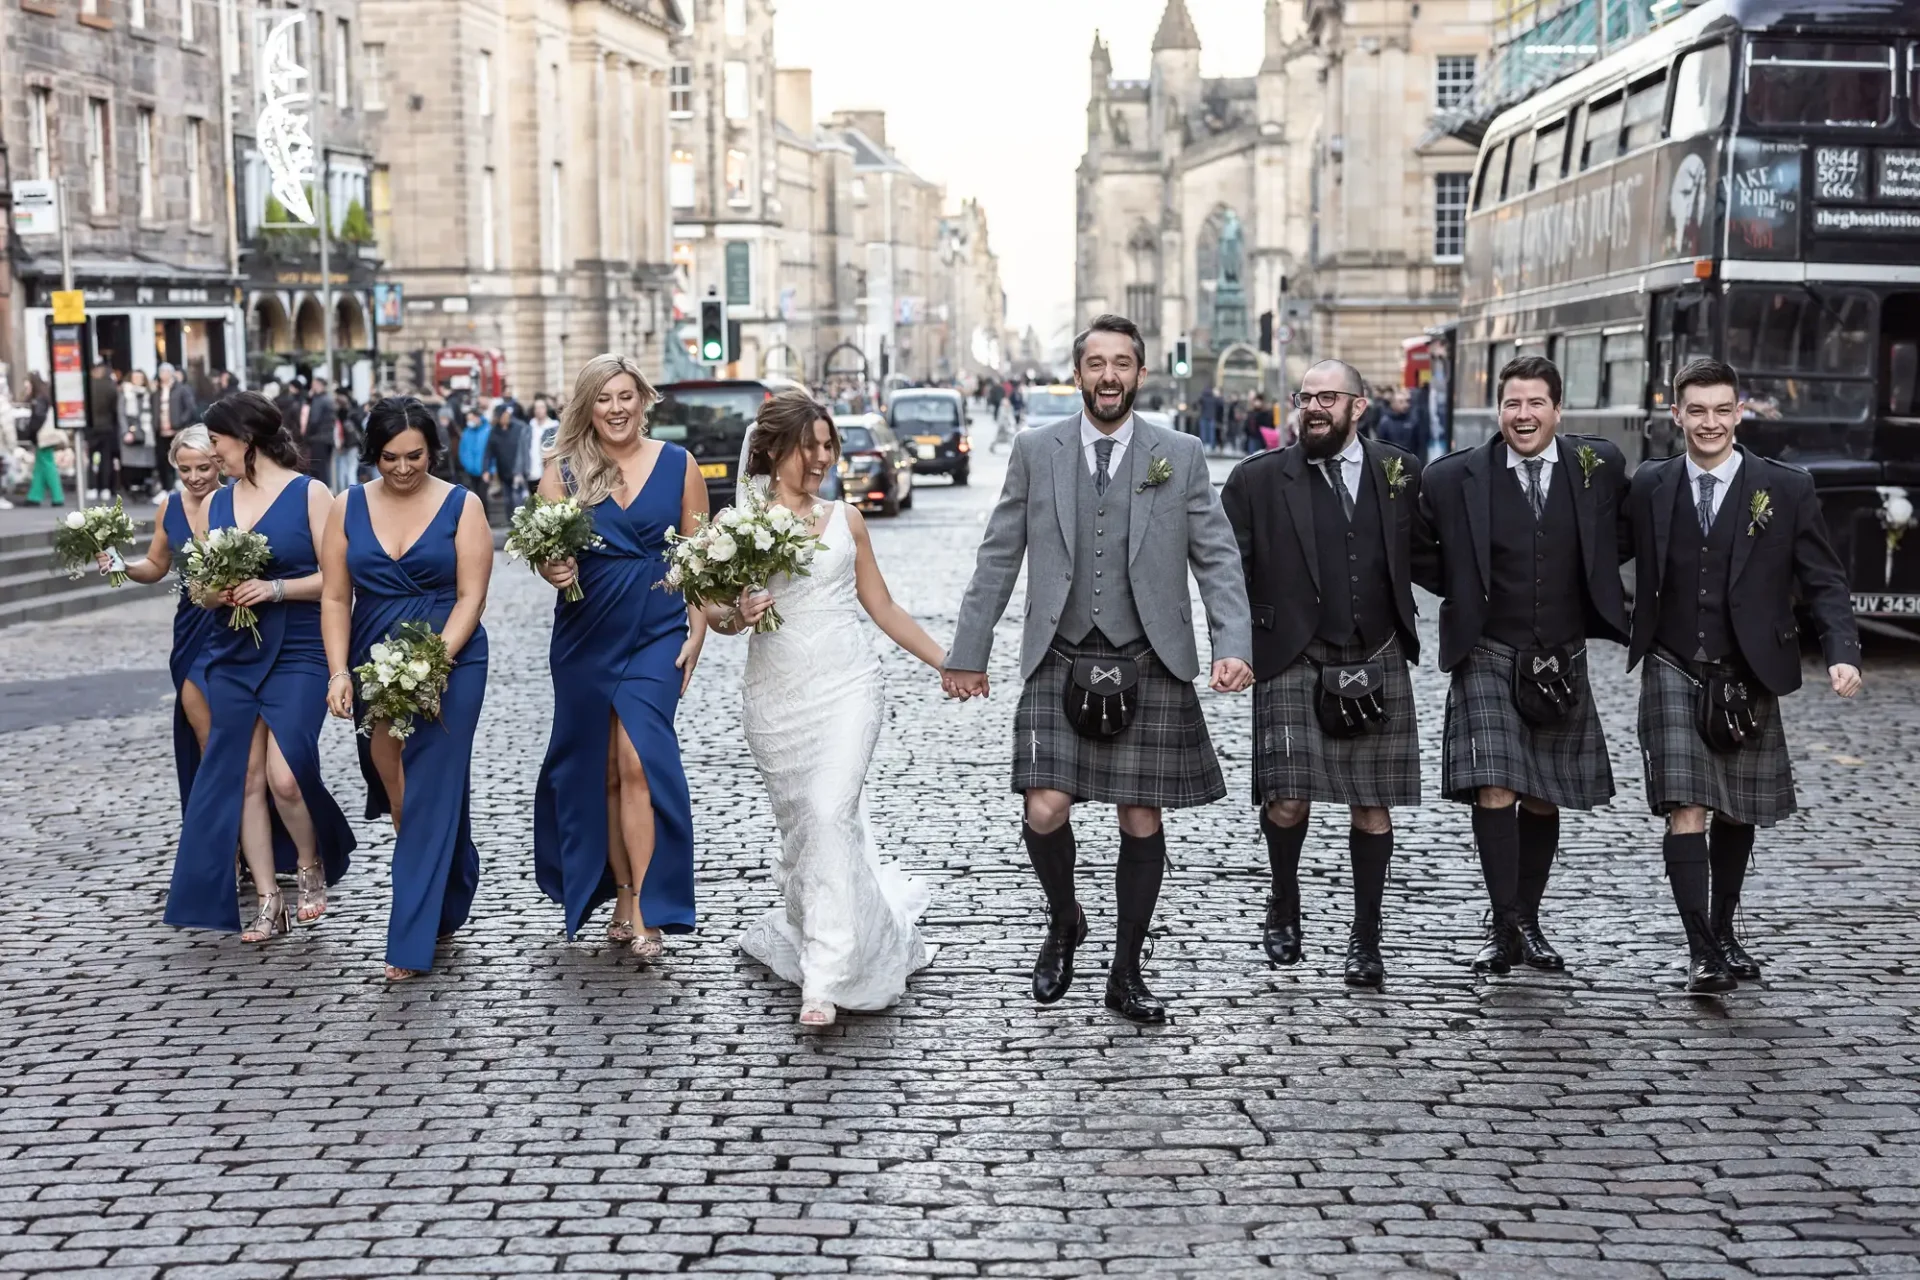 A bride and groom smiling and walking down a cobblestone street with their bridal party, men in kilts and women in blue dresses, in an urban setting.